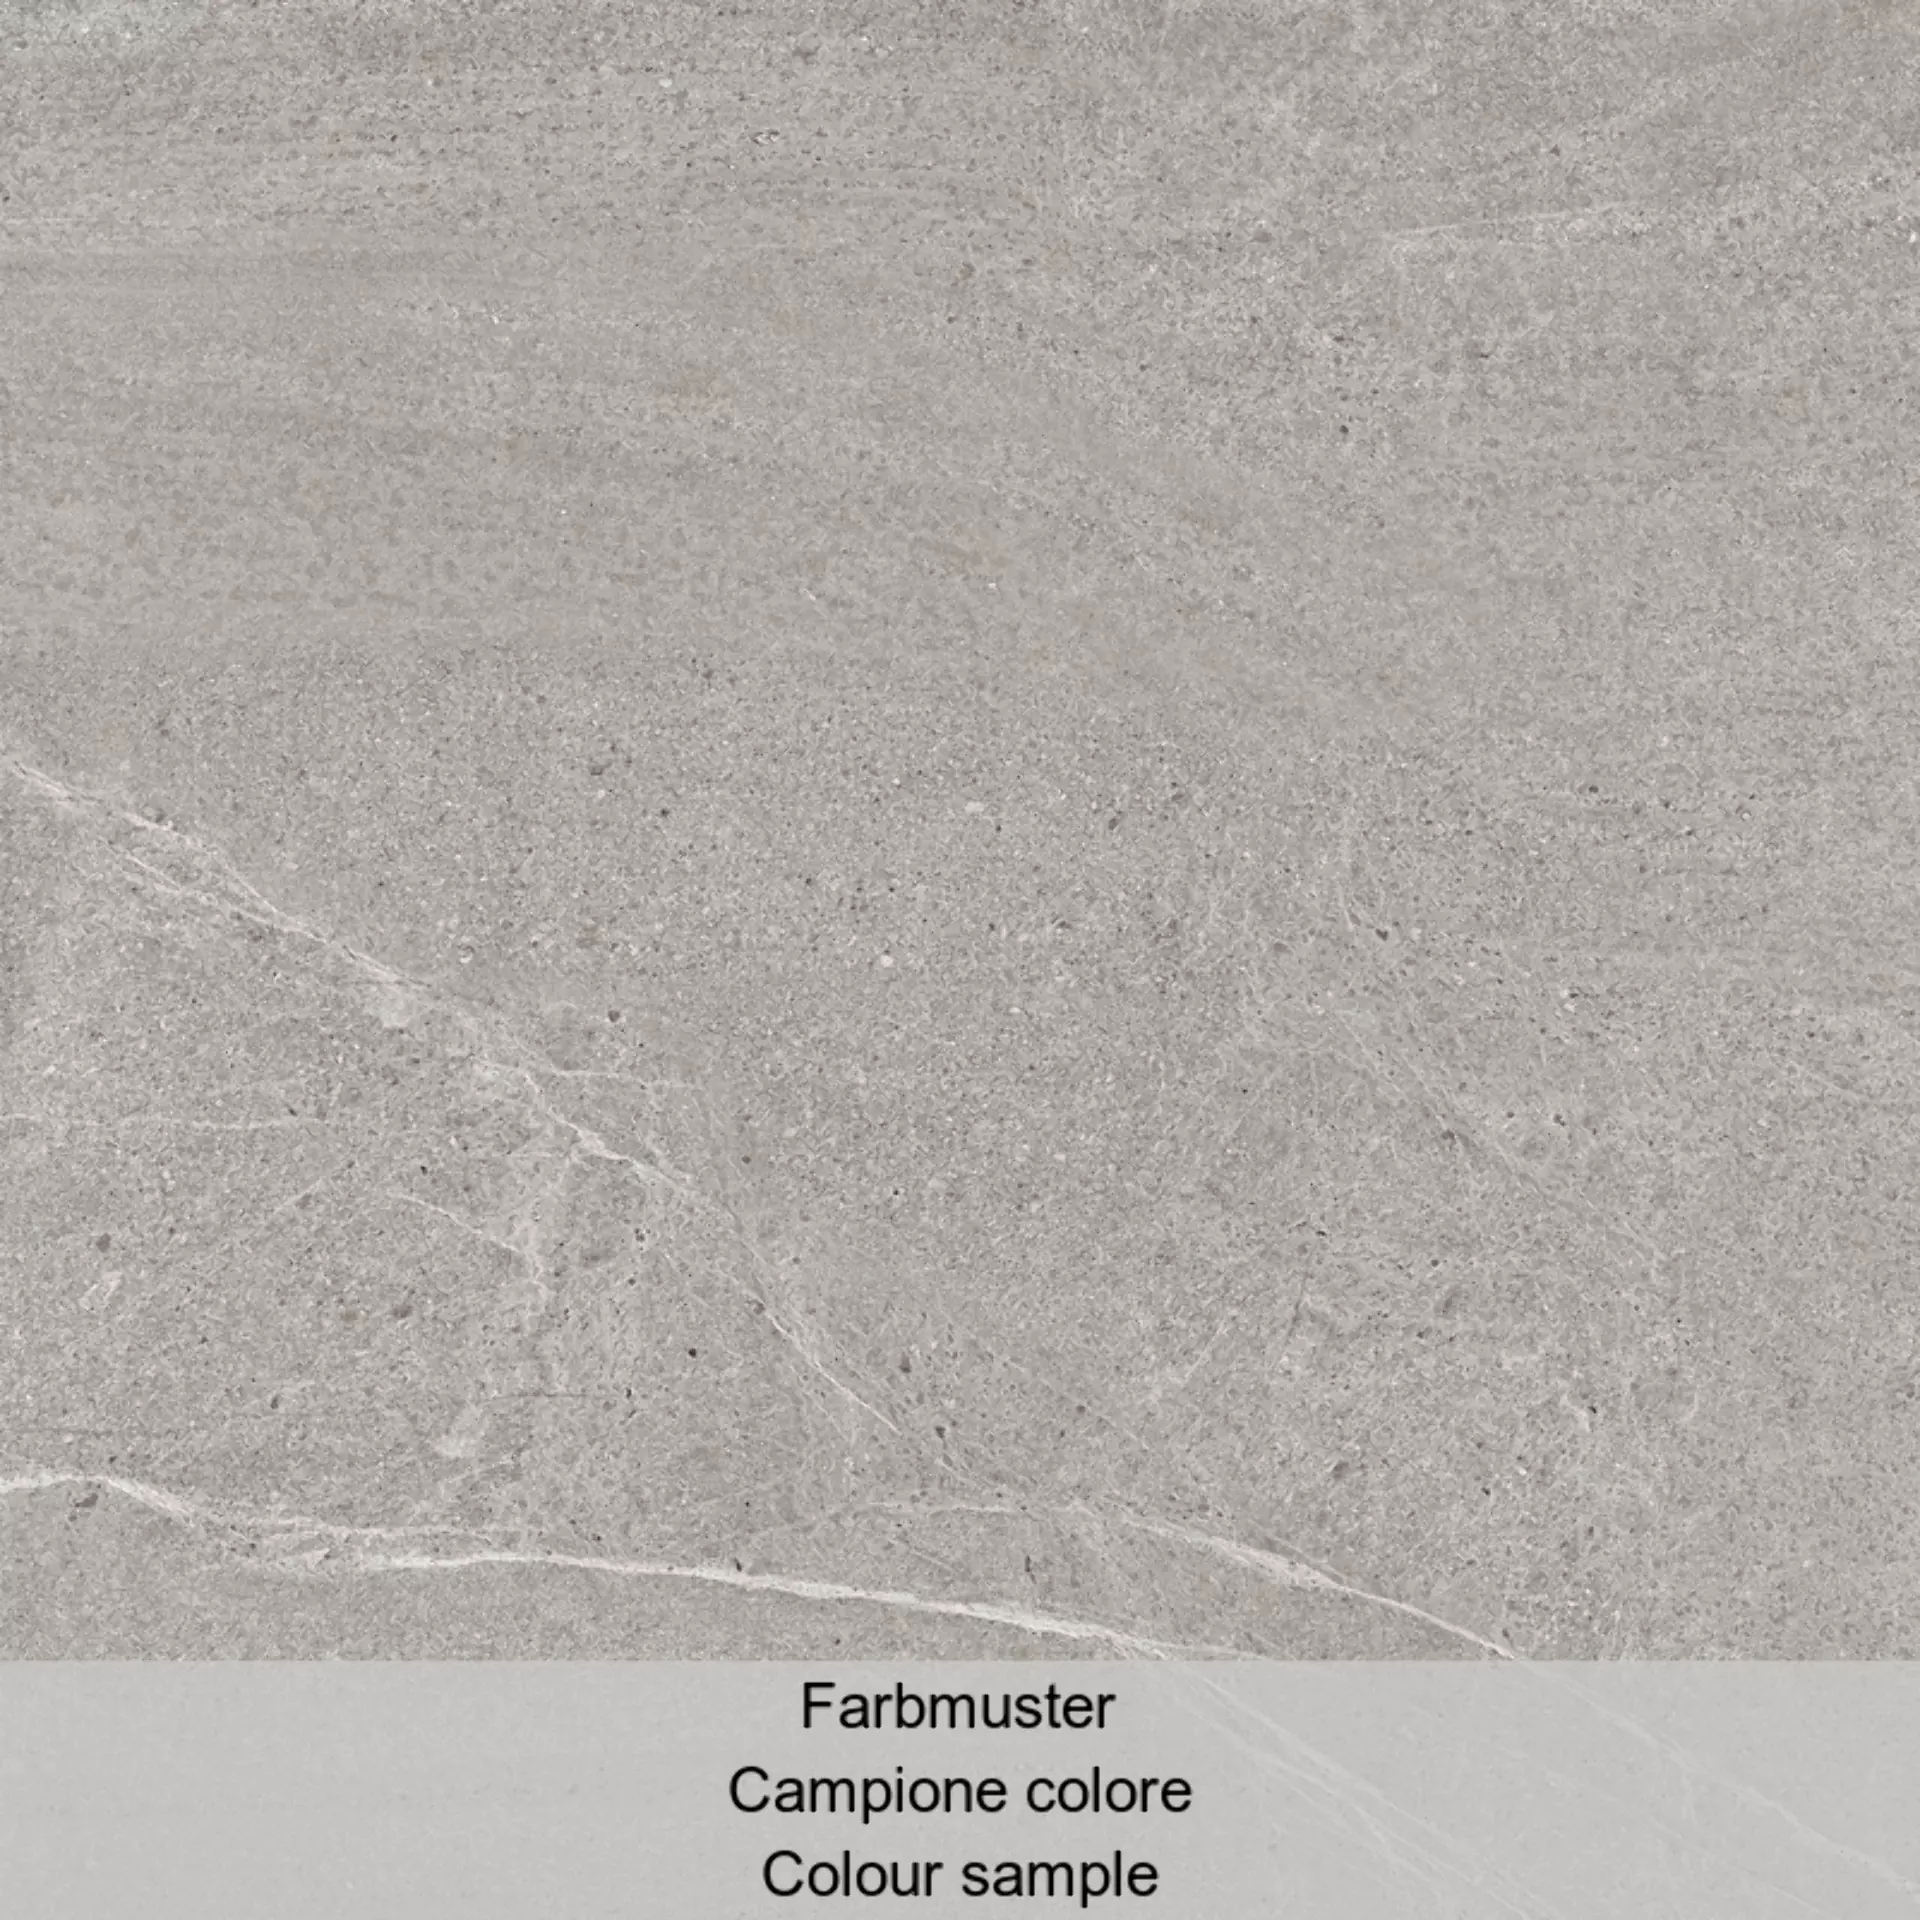 Cottodeste Limestone Oyster Blazed Protect EGGLS92 90x90cm rectified 20mm